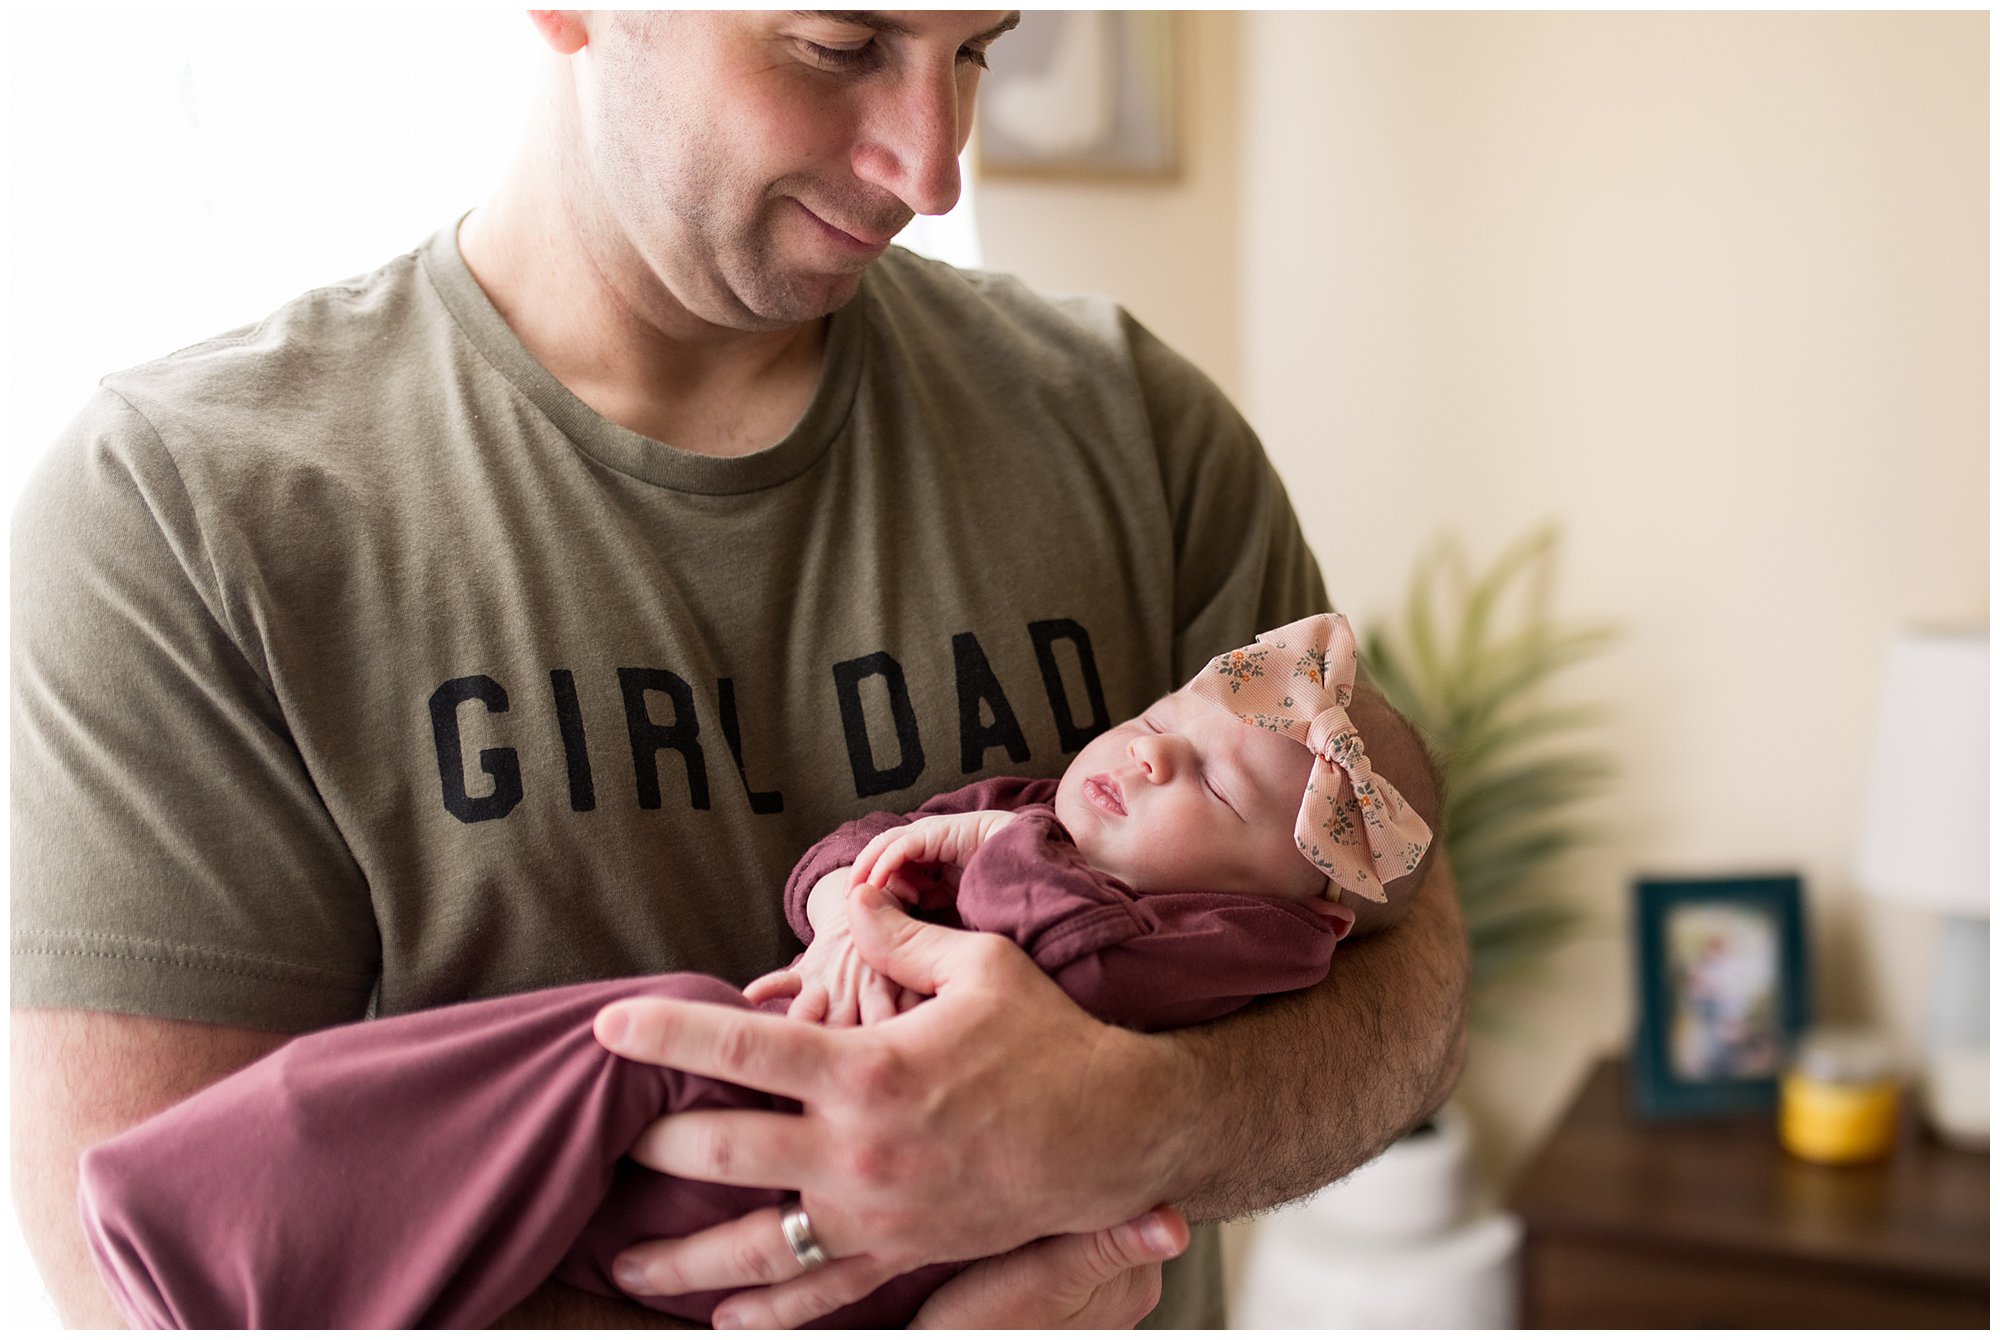 dad holds newborn with shirt that says girl dad